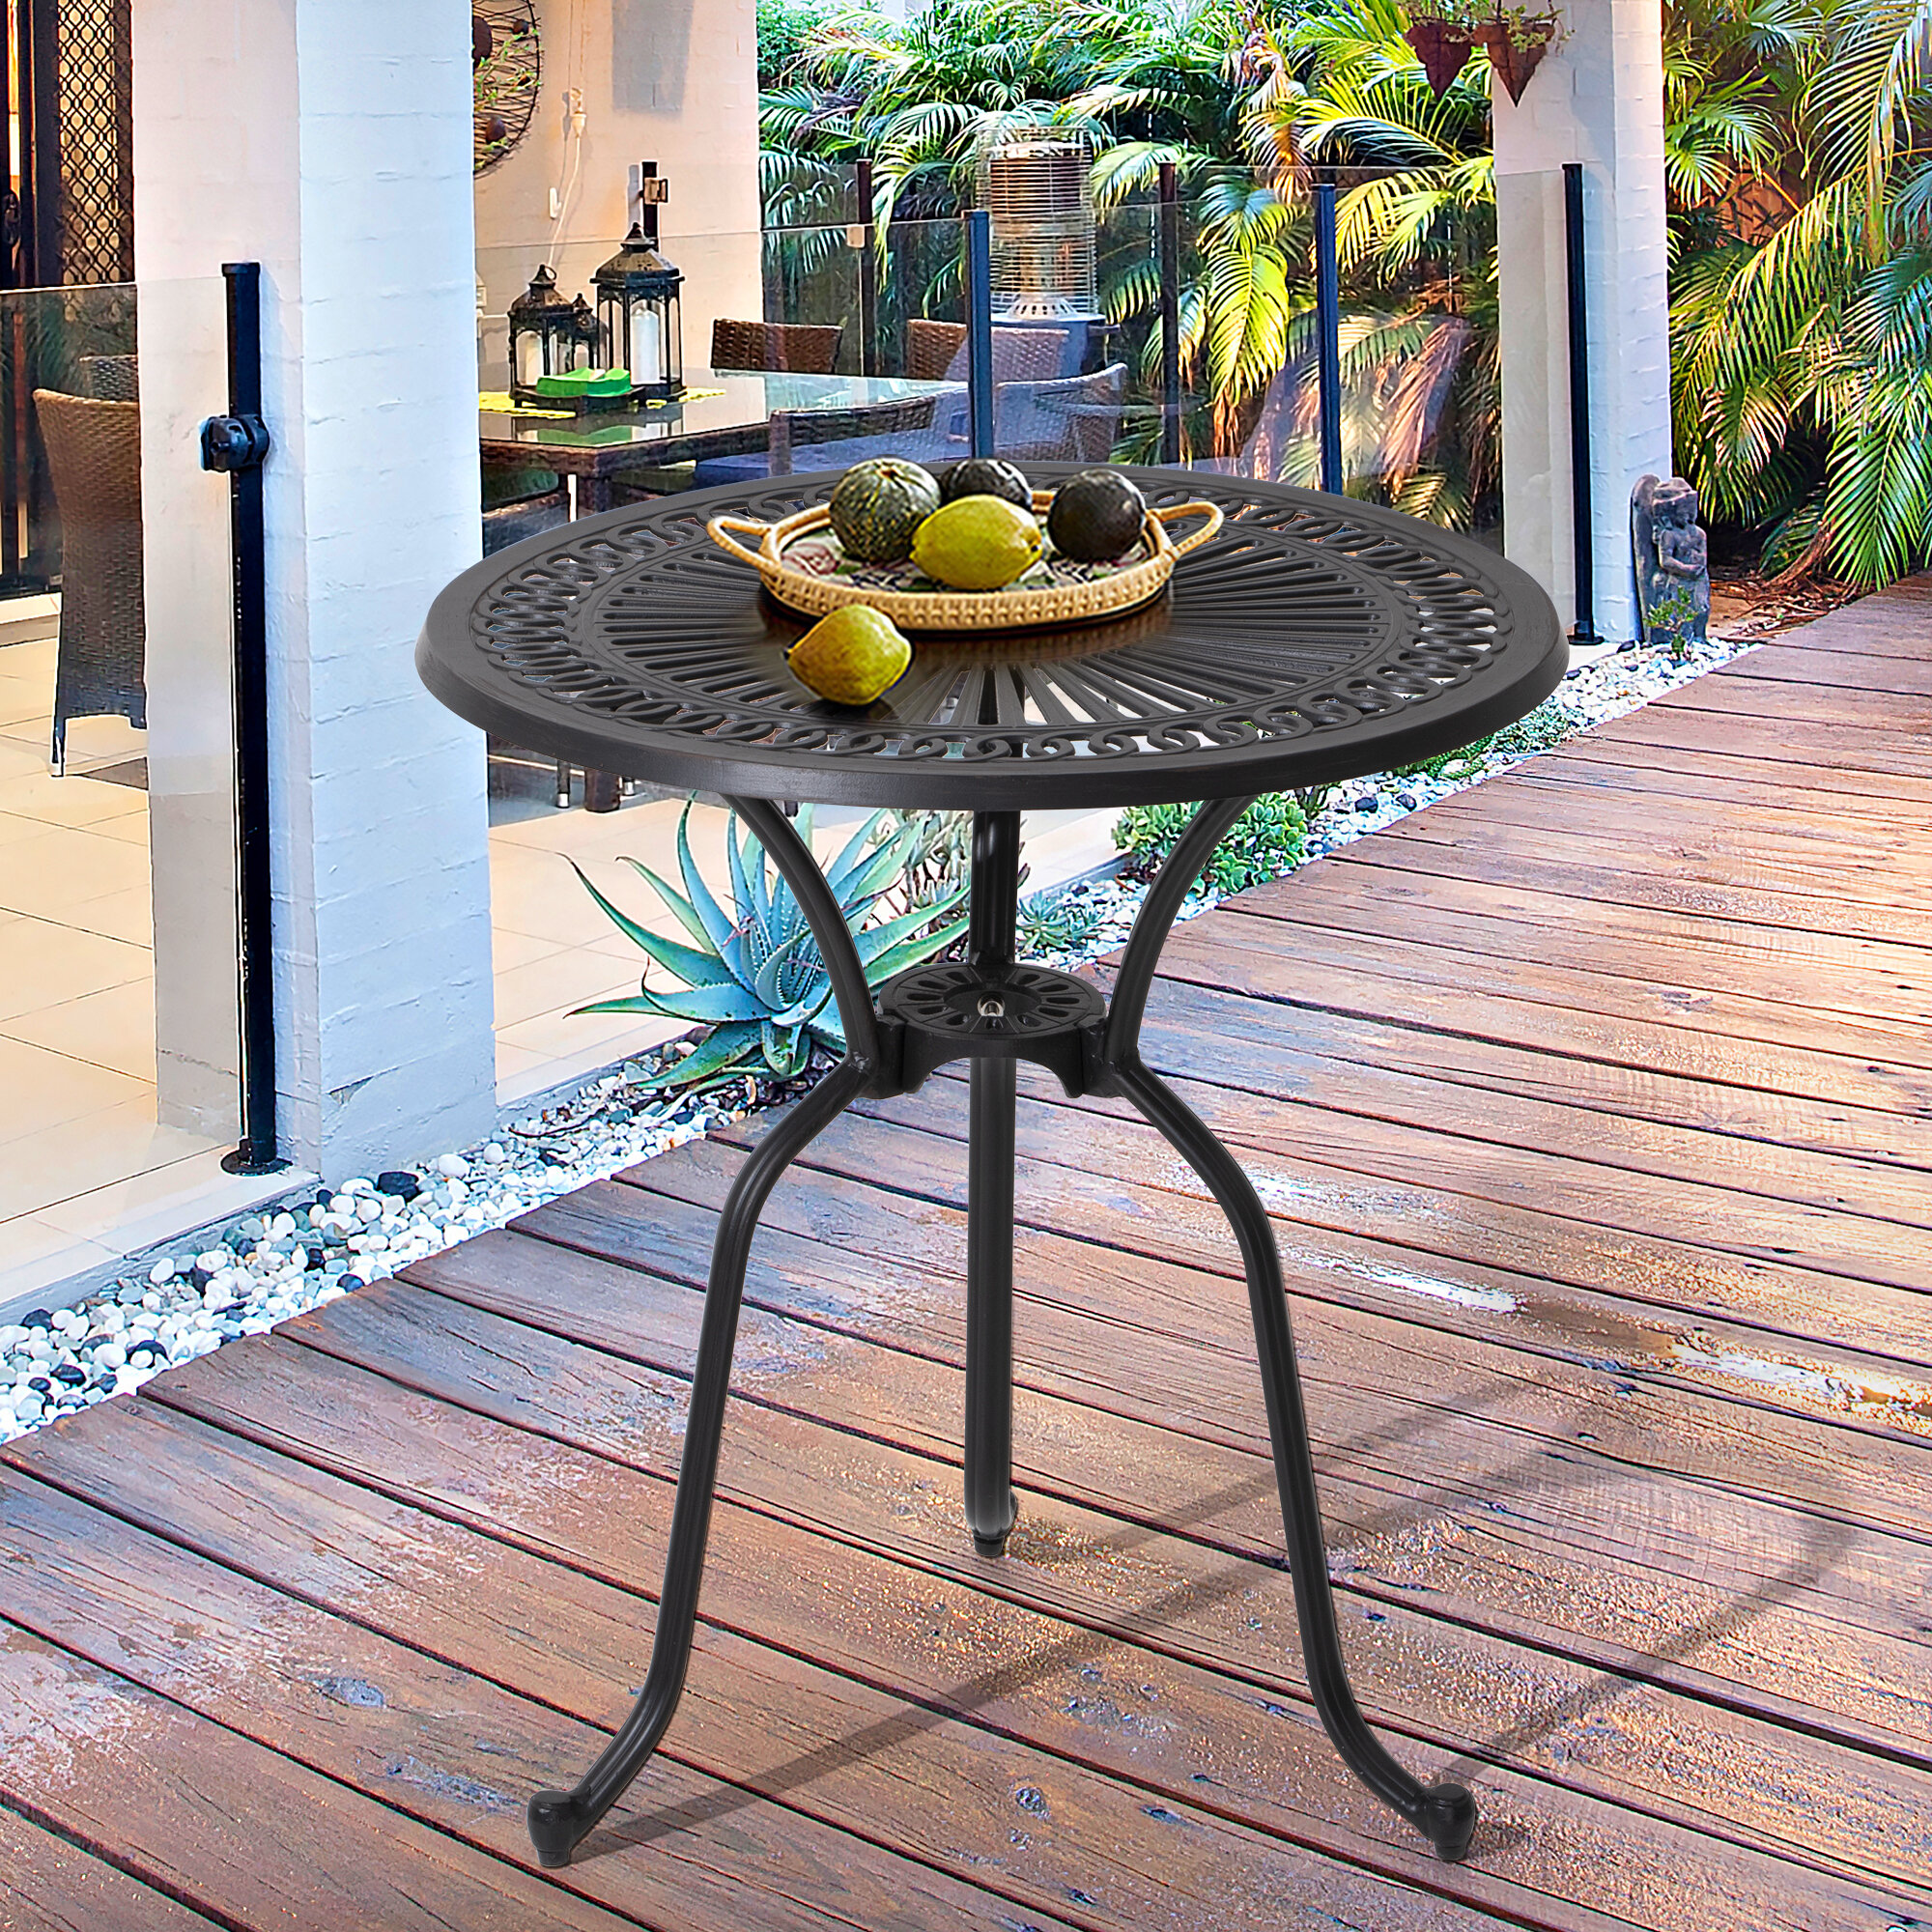 USSerenaY 31 Cast Aluminum Patio Bistro Round Dining Table with Umbrella Hole Conversation Outdoor Table for Garden Pool Side Deck 